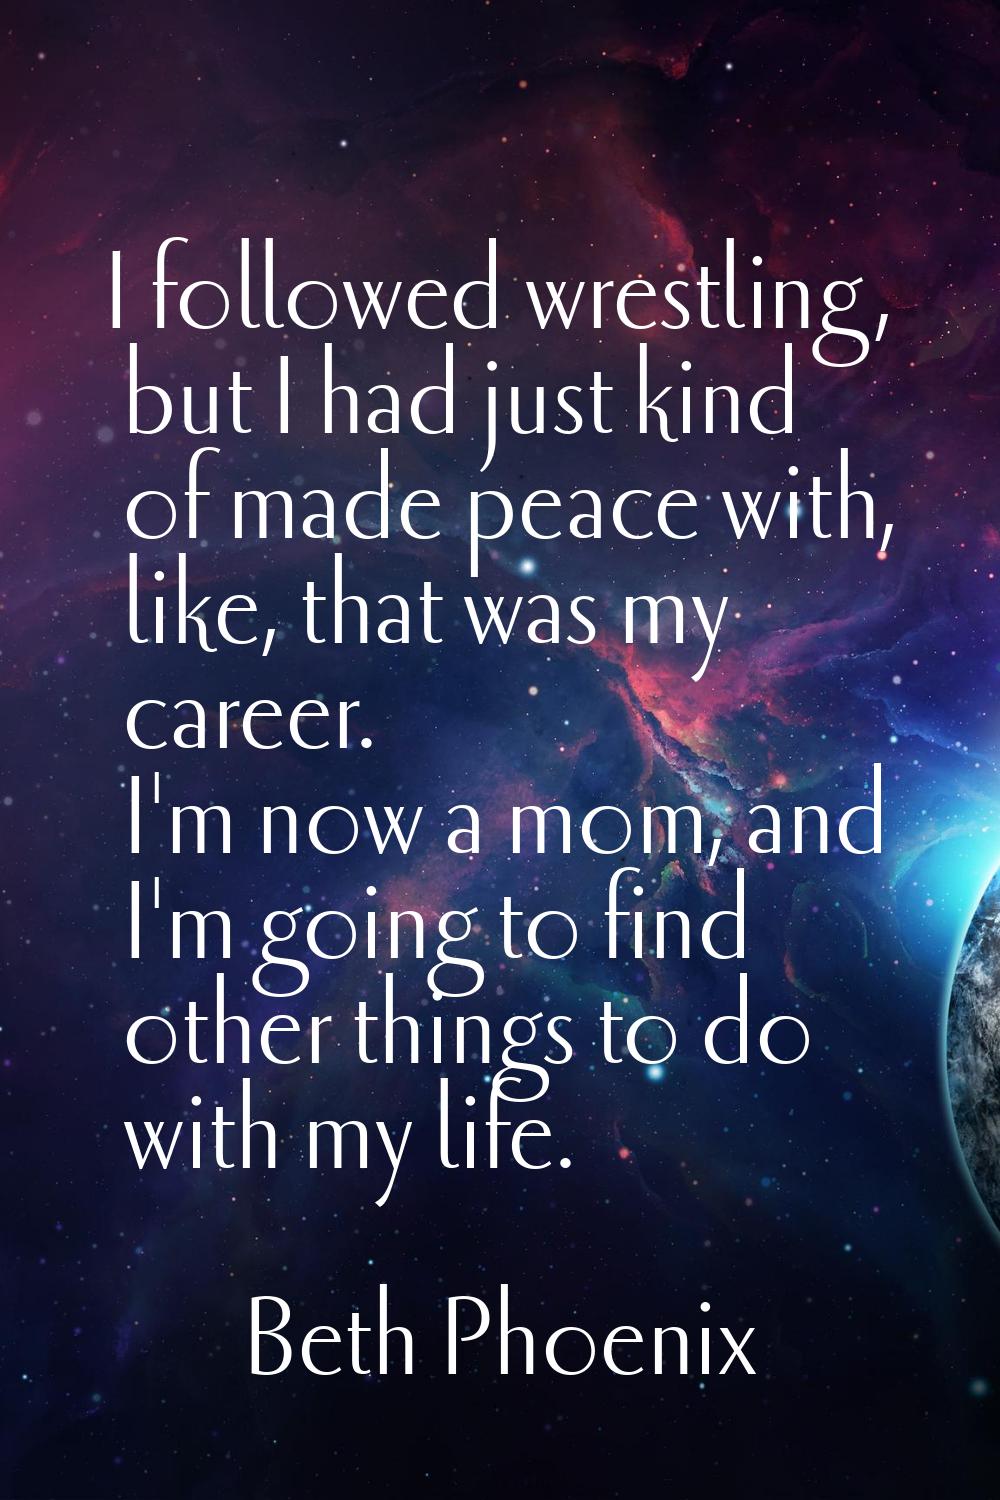 I followed wrestling, but I had just kind of made peace with, like, that was my career. I'm now a m